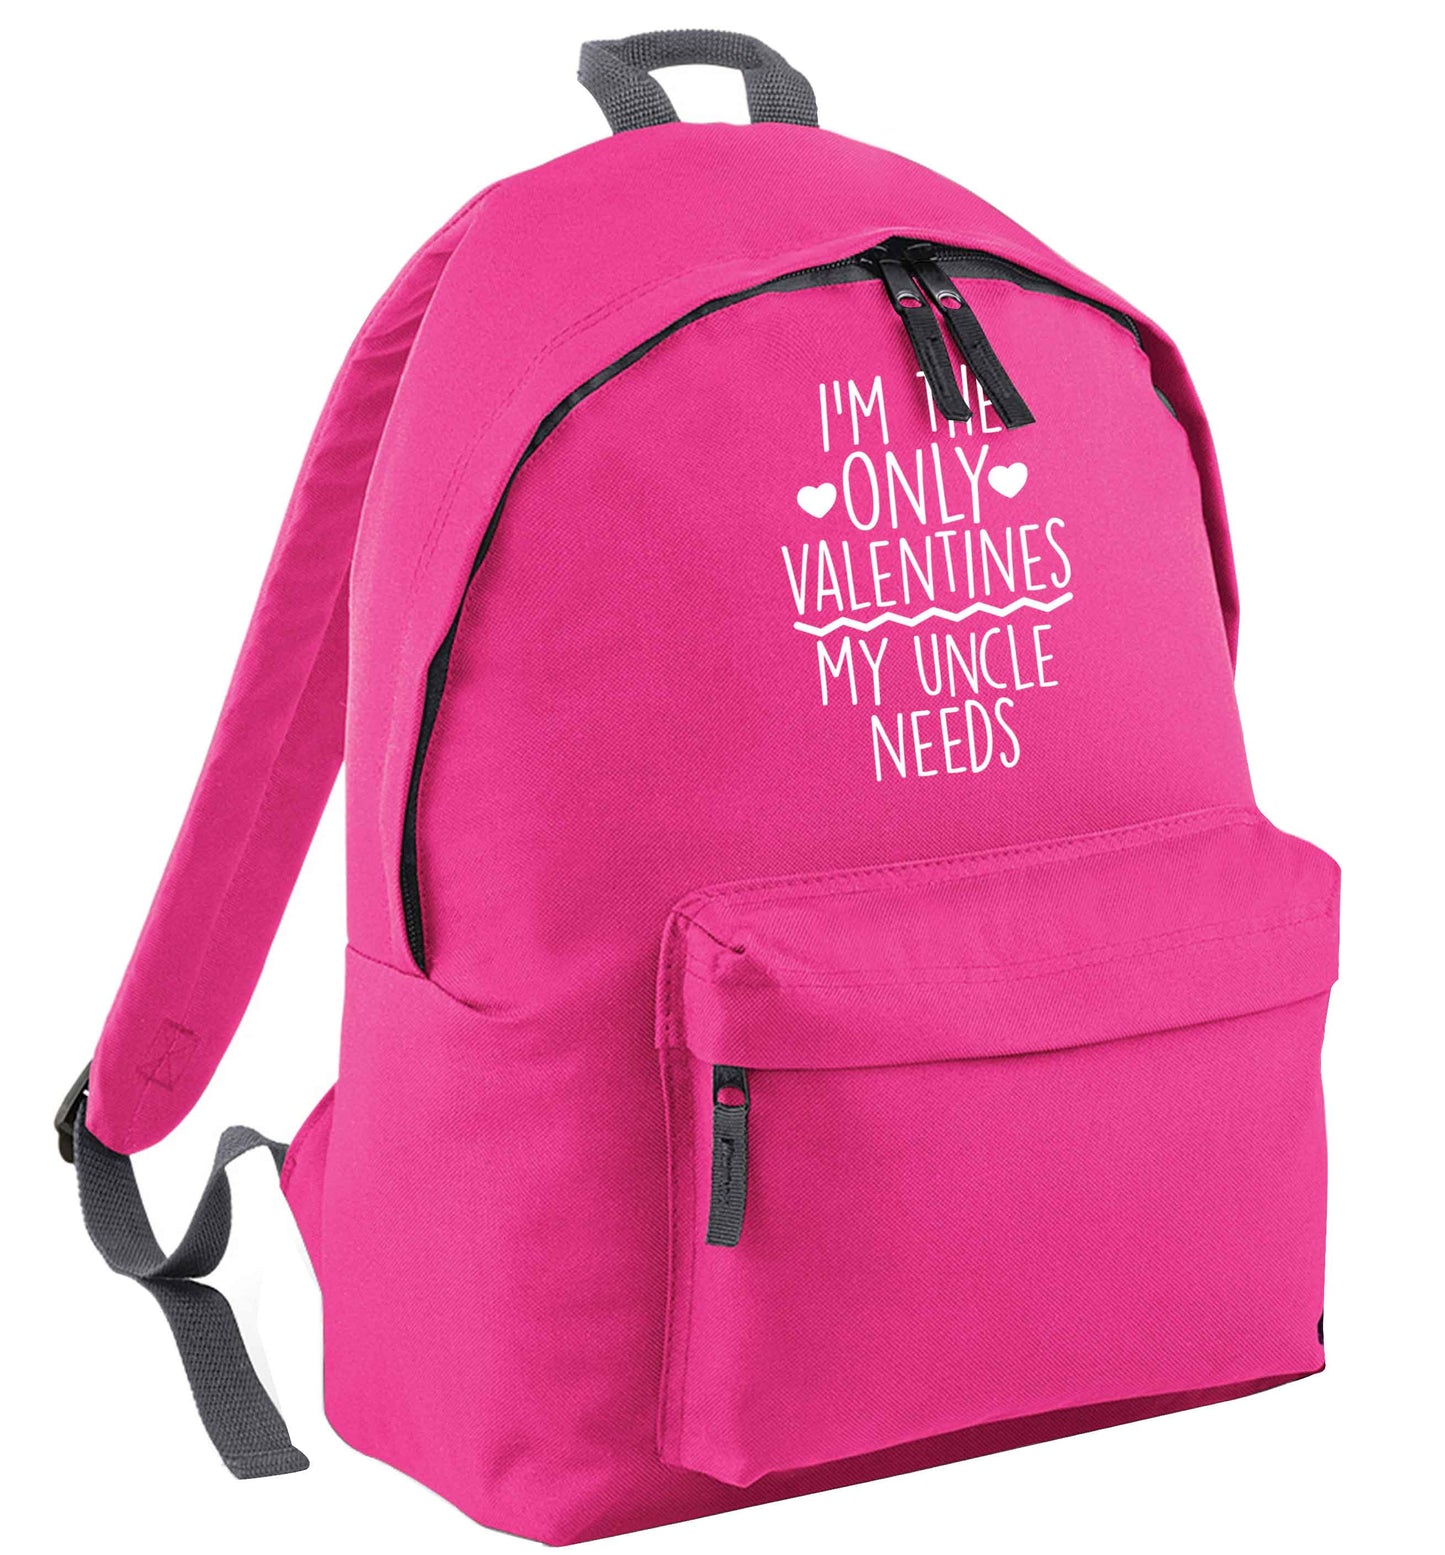 I'm the only valentines my uncle needs pink childrens backpack